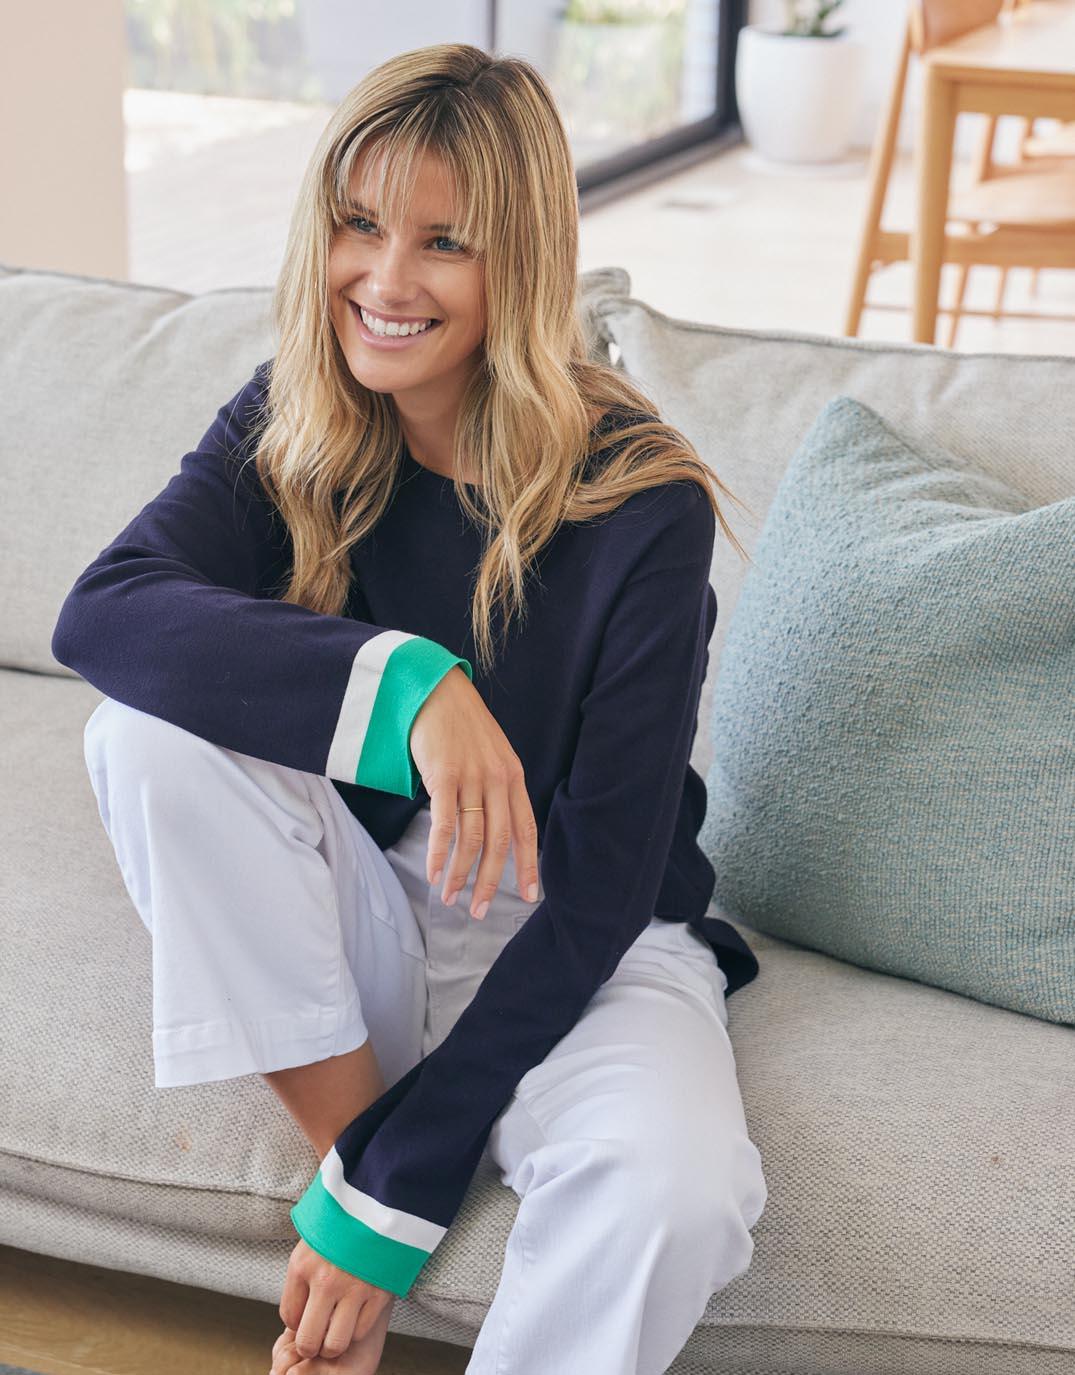 White & Co. - Giselle Lightweight Knit Top - Navy/Green/White - White & Co Living Knitwear